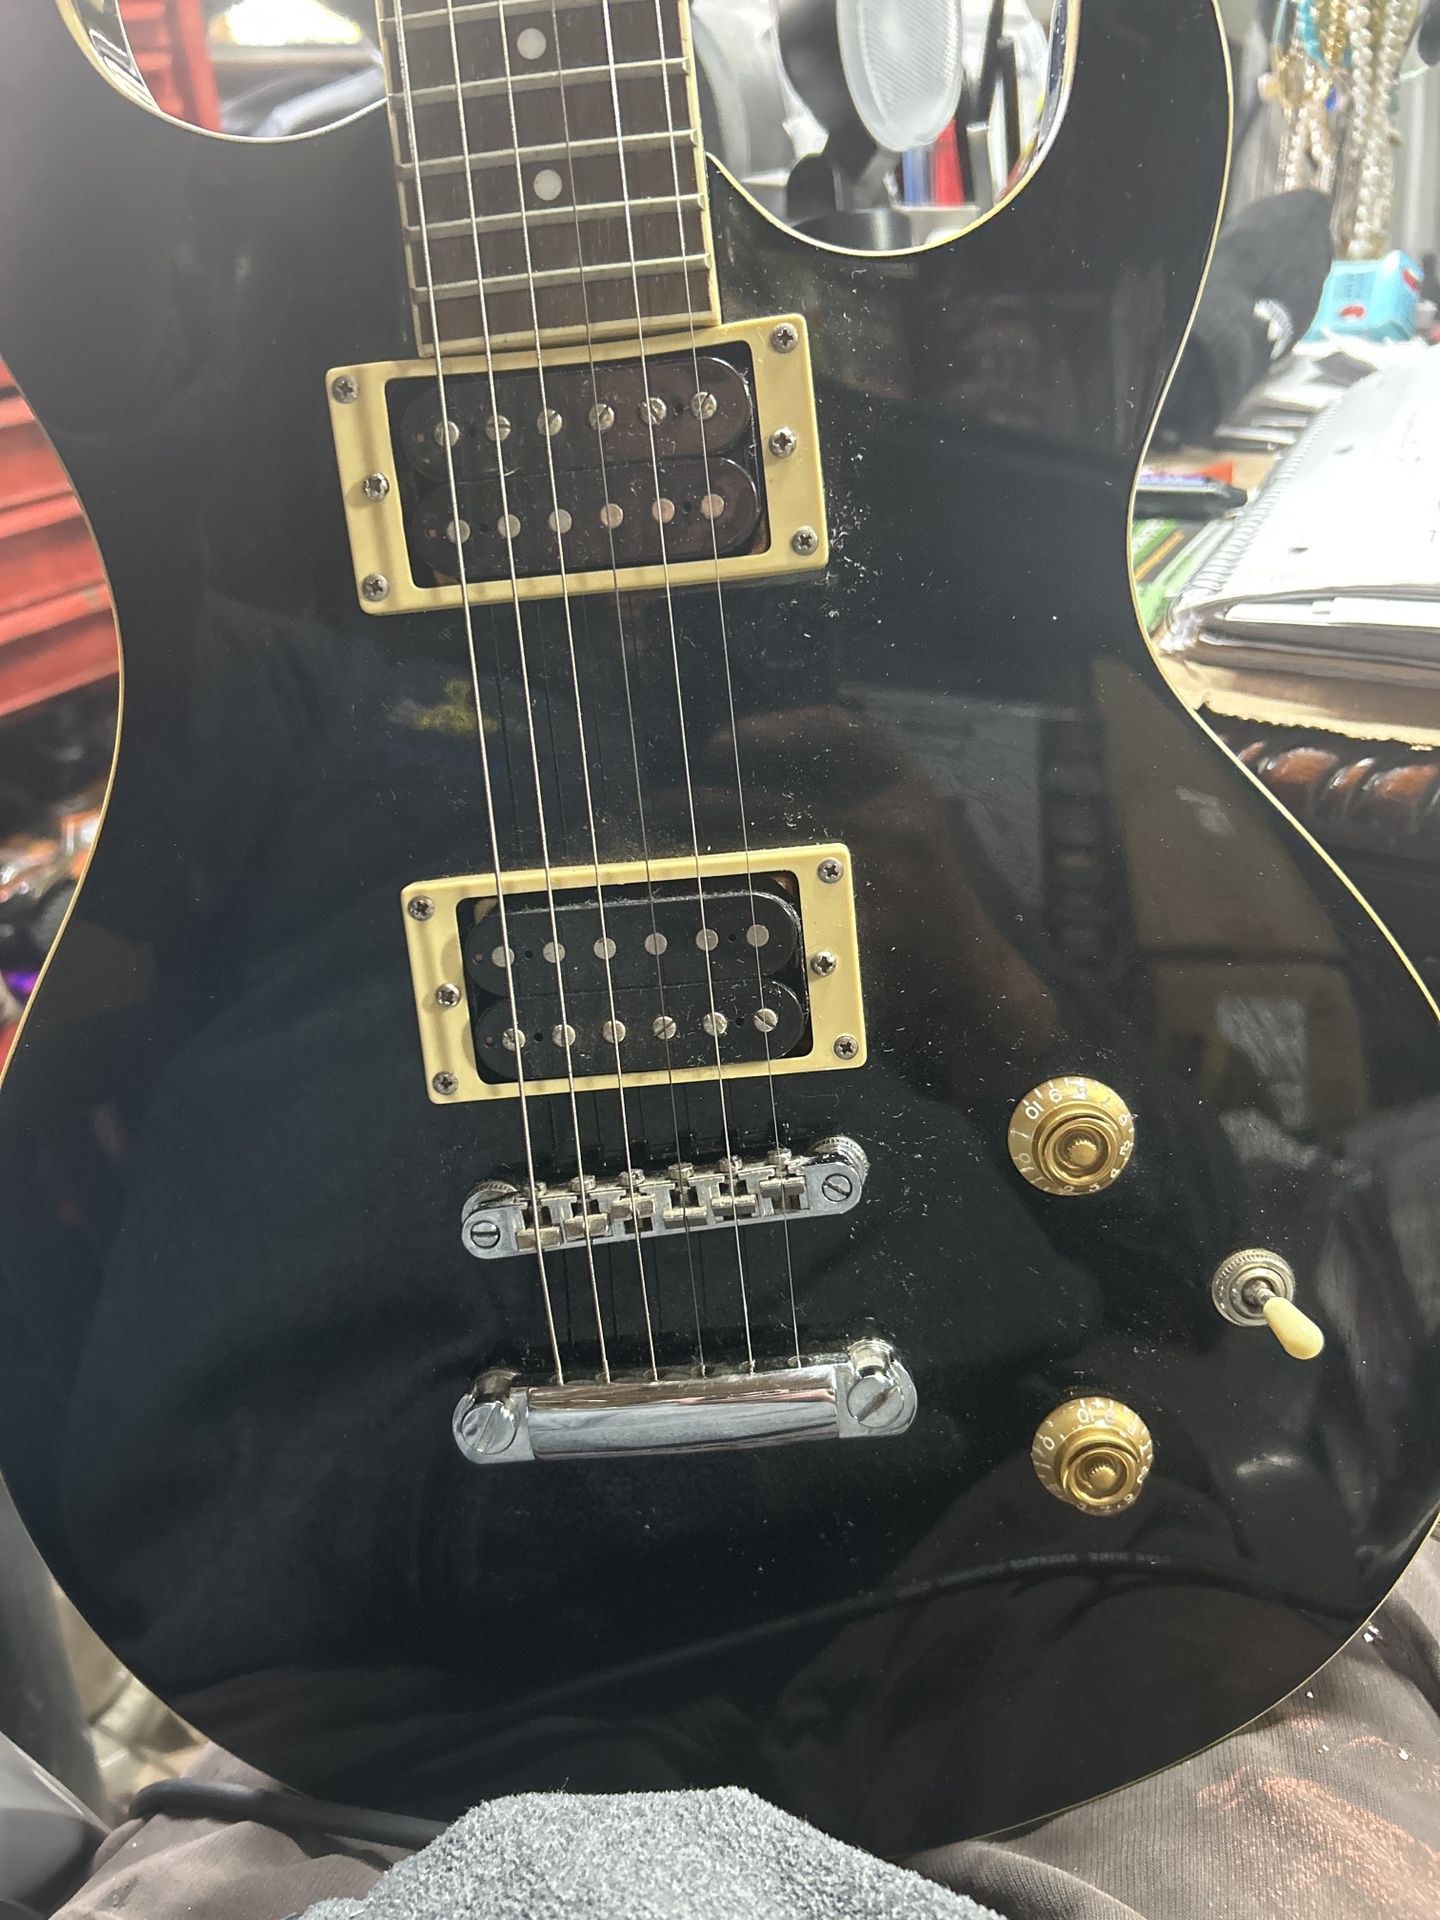 Guitar Used A Couple Of Times,with Nice Loud Amp And A Storage Bag For Amp $200